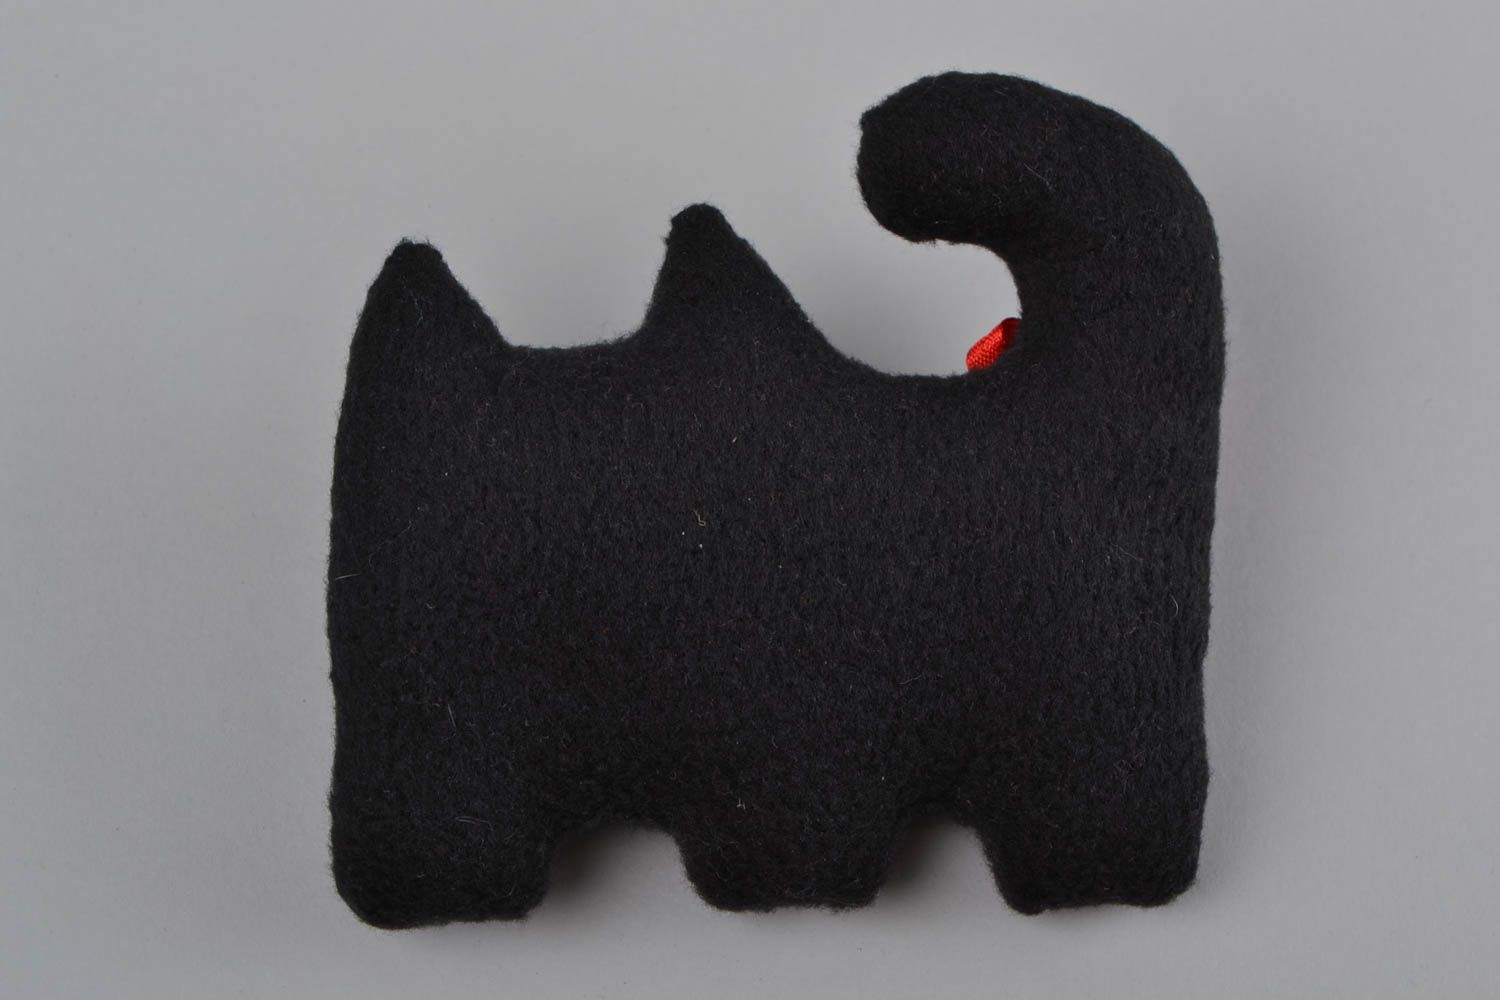 Handmade small soft toy sewn of black fleece in the shape of cat with red bow photo 5